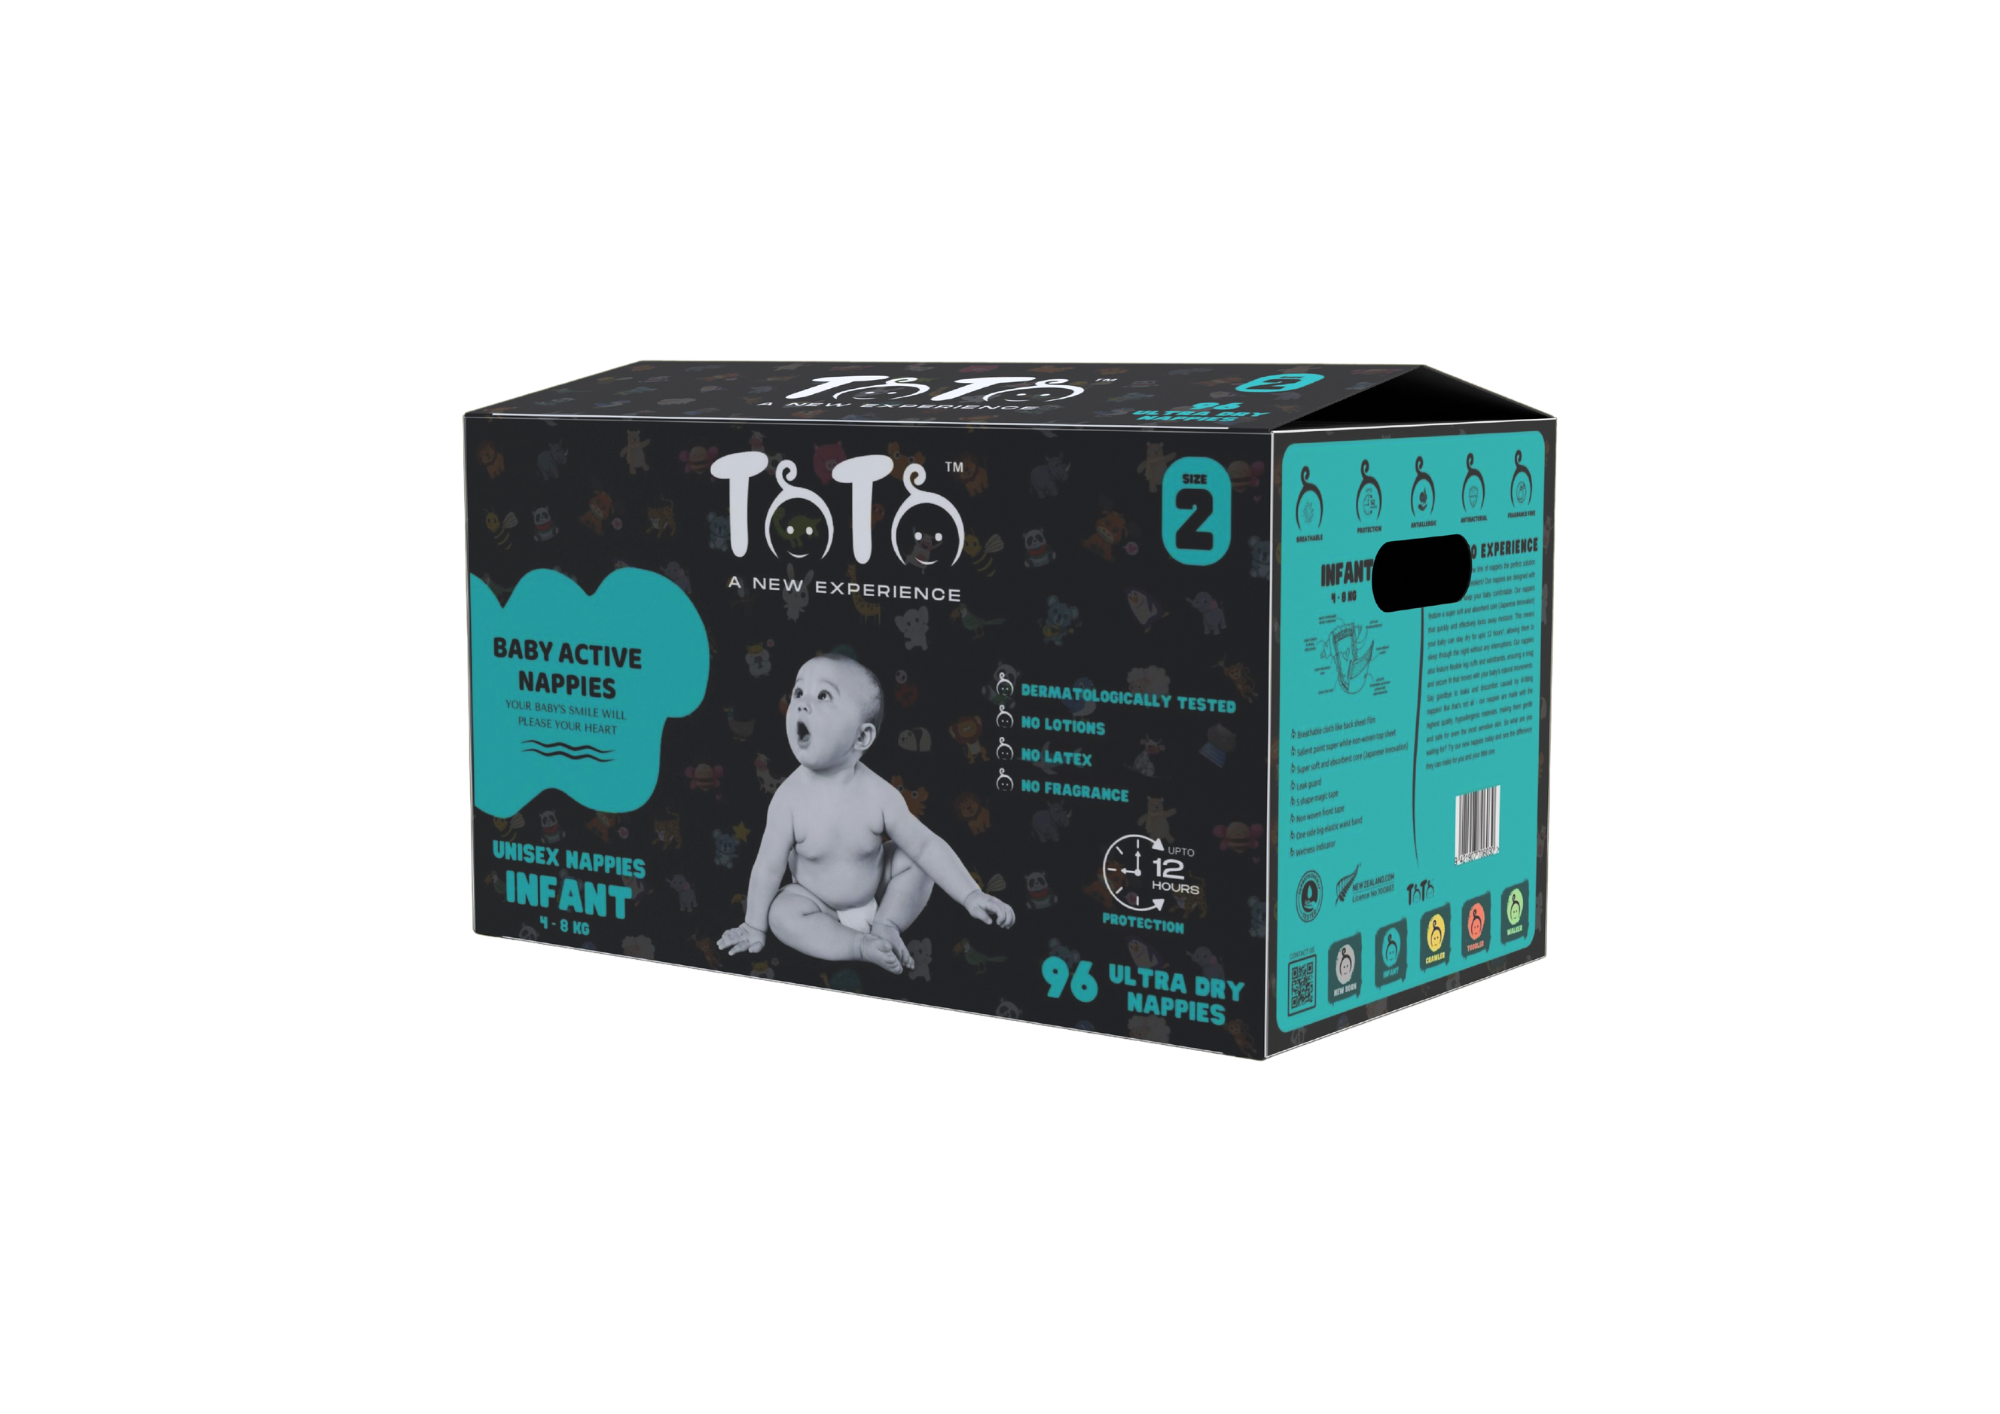 Toto Premium Nappies for Infant - Size 2 - 96 Nappies - 4 to 8kg